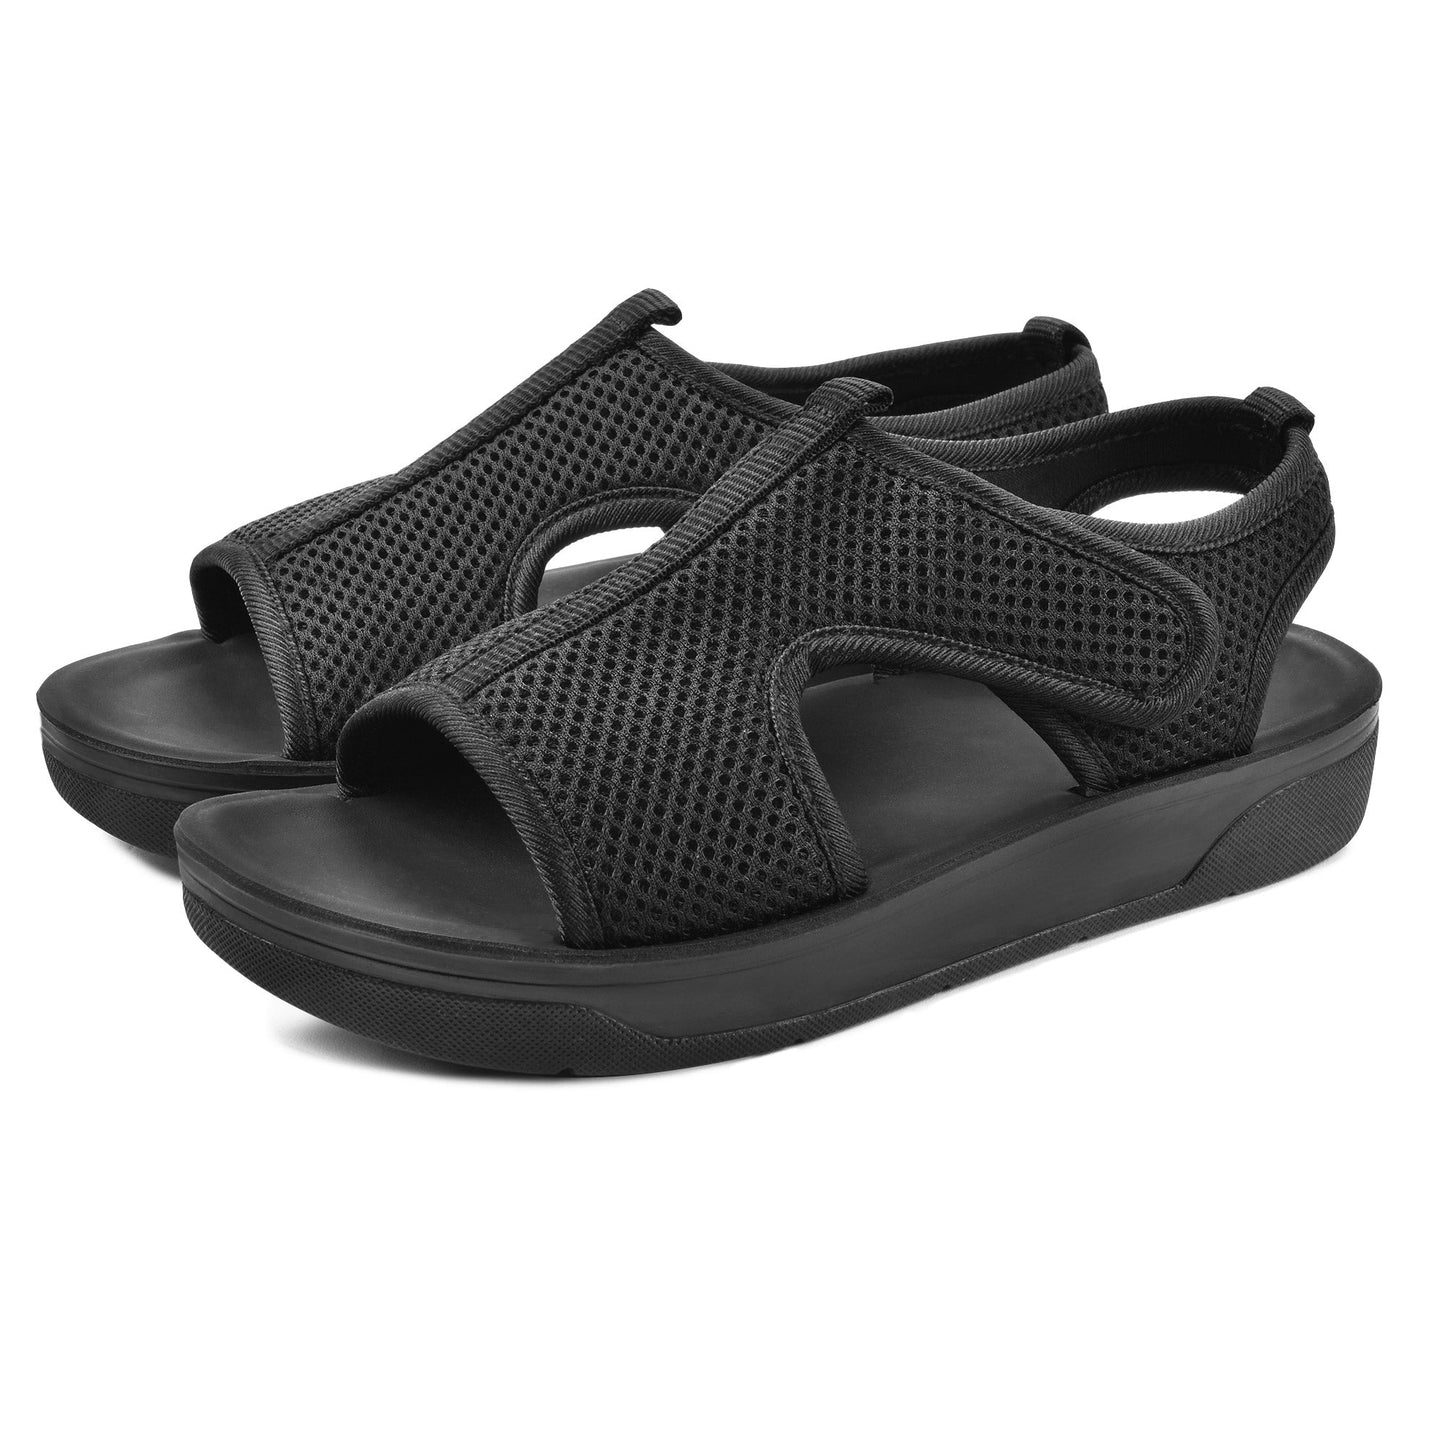 AEROTHOTIC Darin Arch Support Walking Slingback Sandals for Women - Original Thailand Imported - L1005